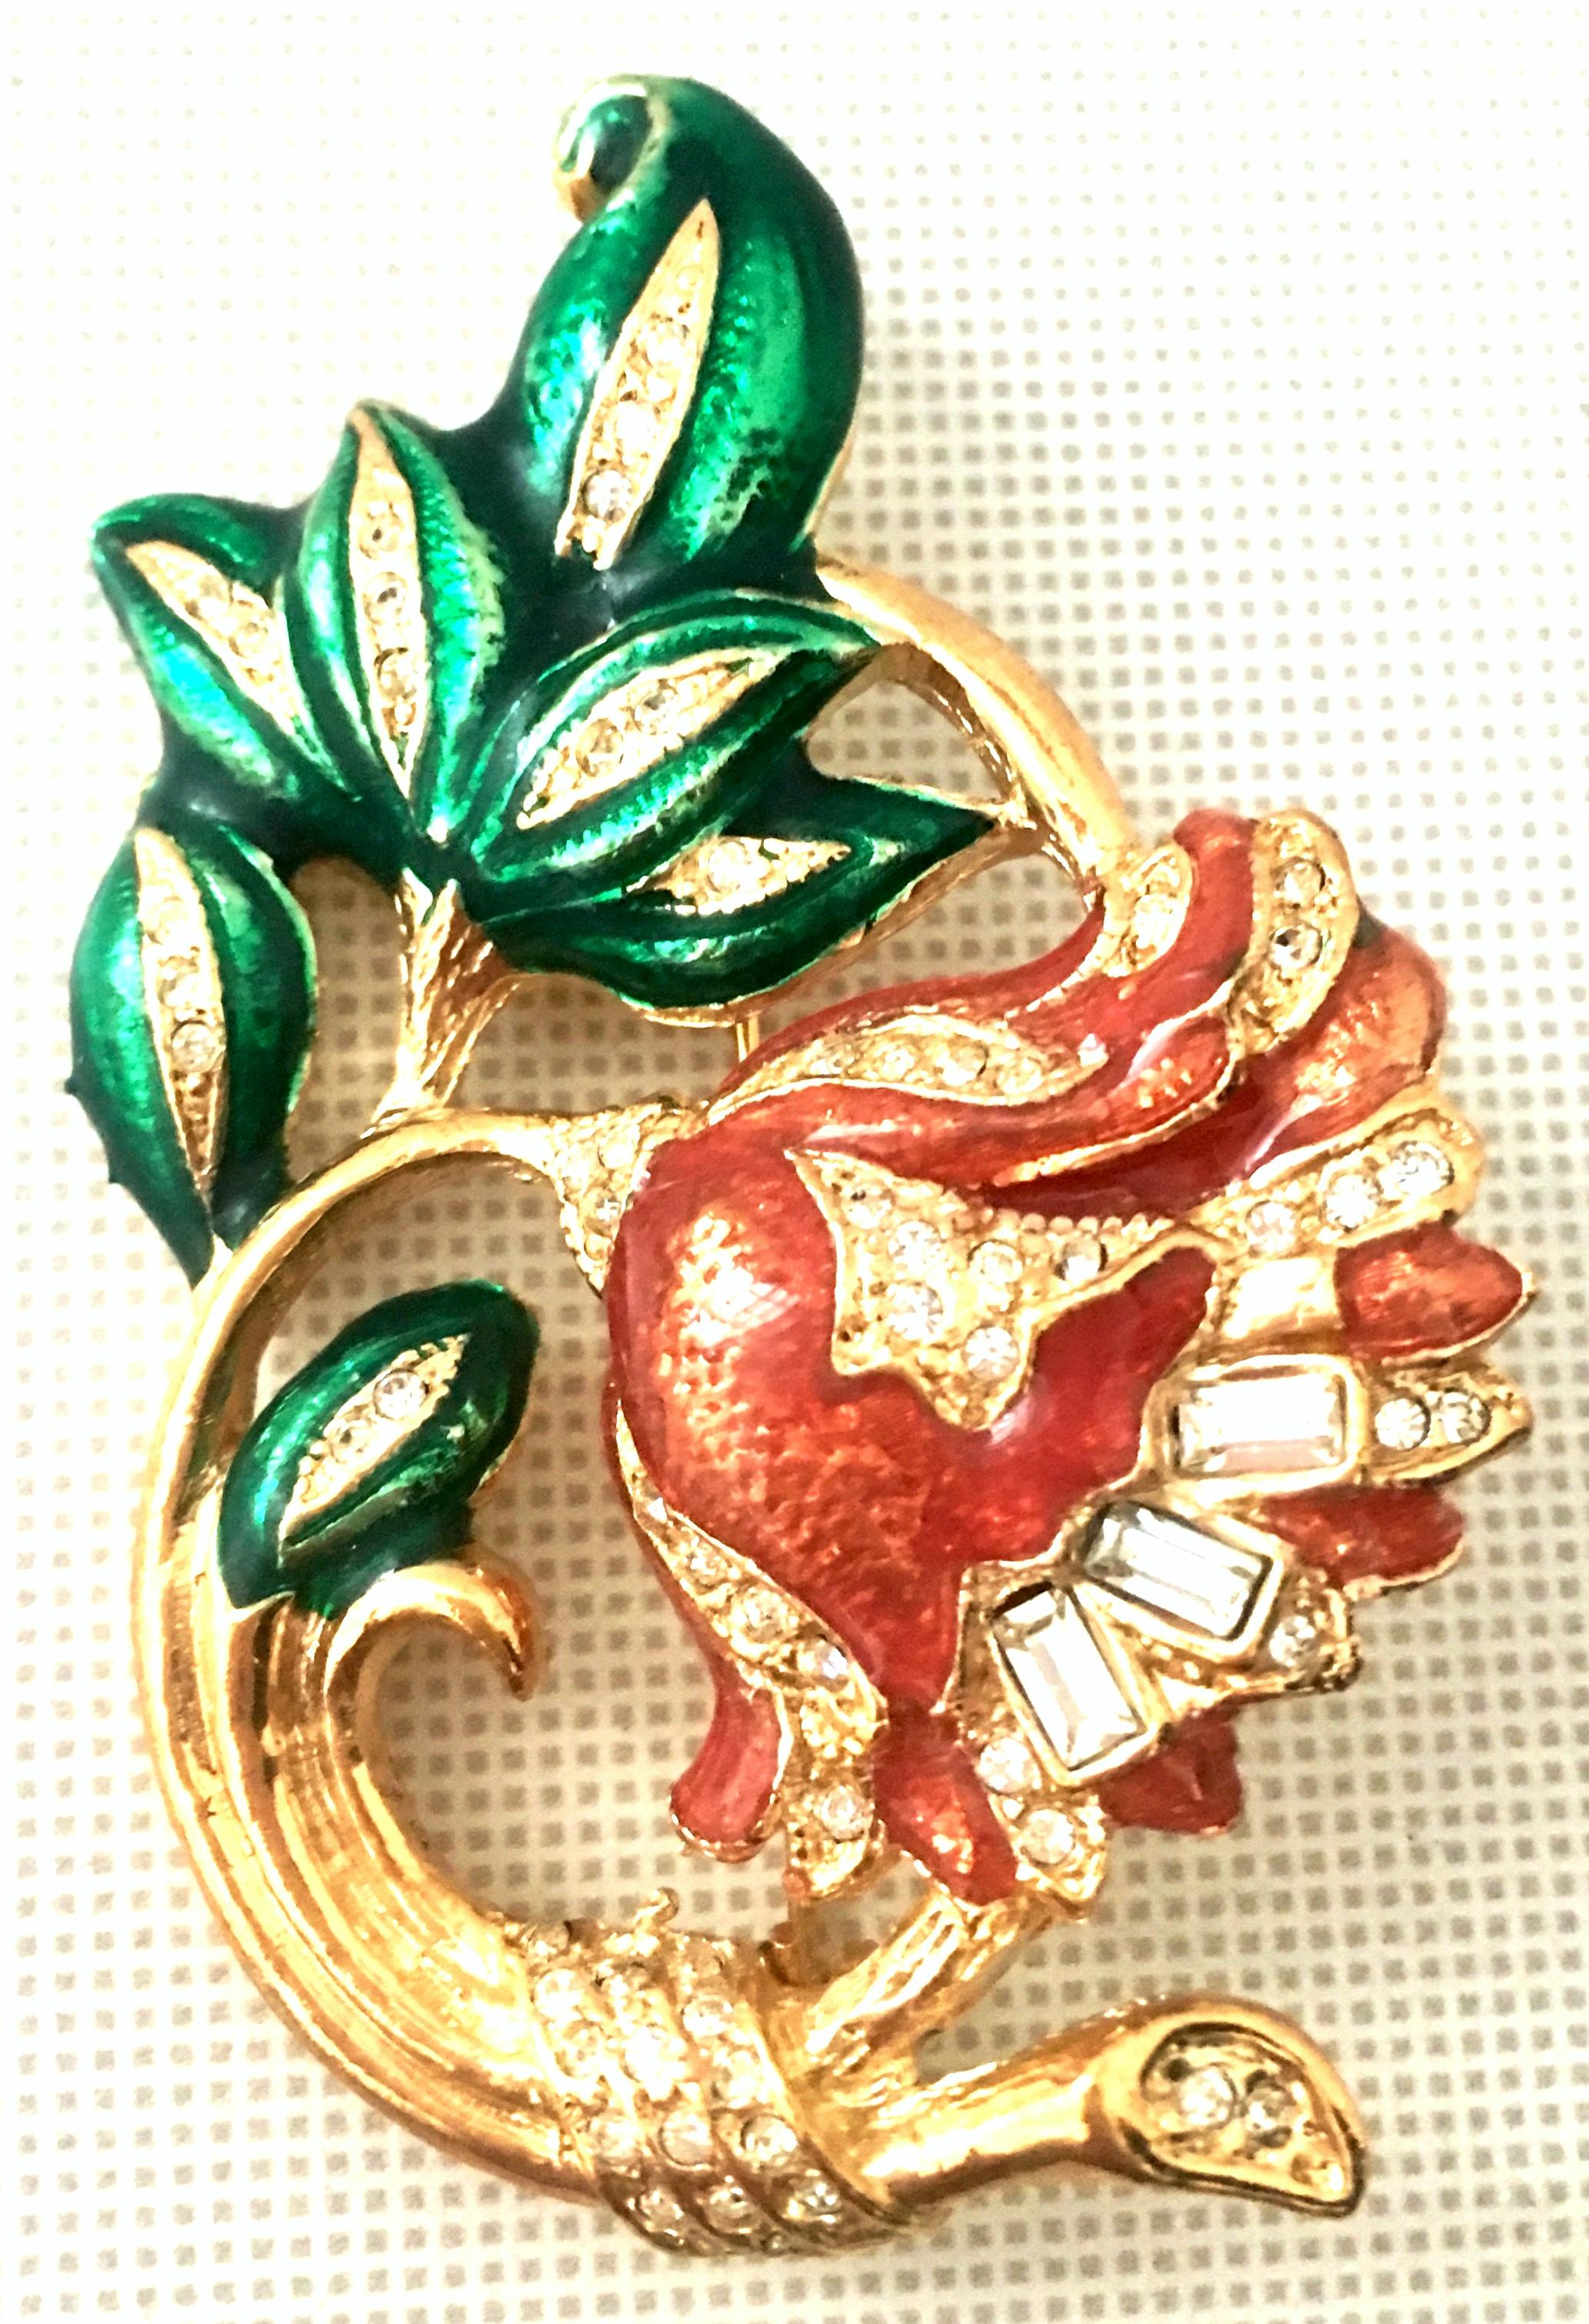 20th Century Gold Plate, Enamel & Austrian Crystal Dimensional French Horn And Fauna Christmas Brooch. This signed finely crafted piece features a dimensional French Horn motif with hand painted vivid green and coral enamel fauna with colorless